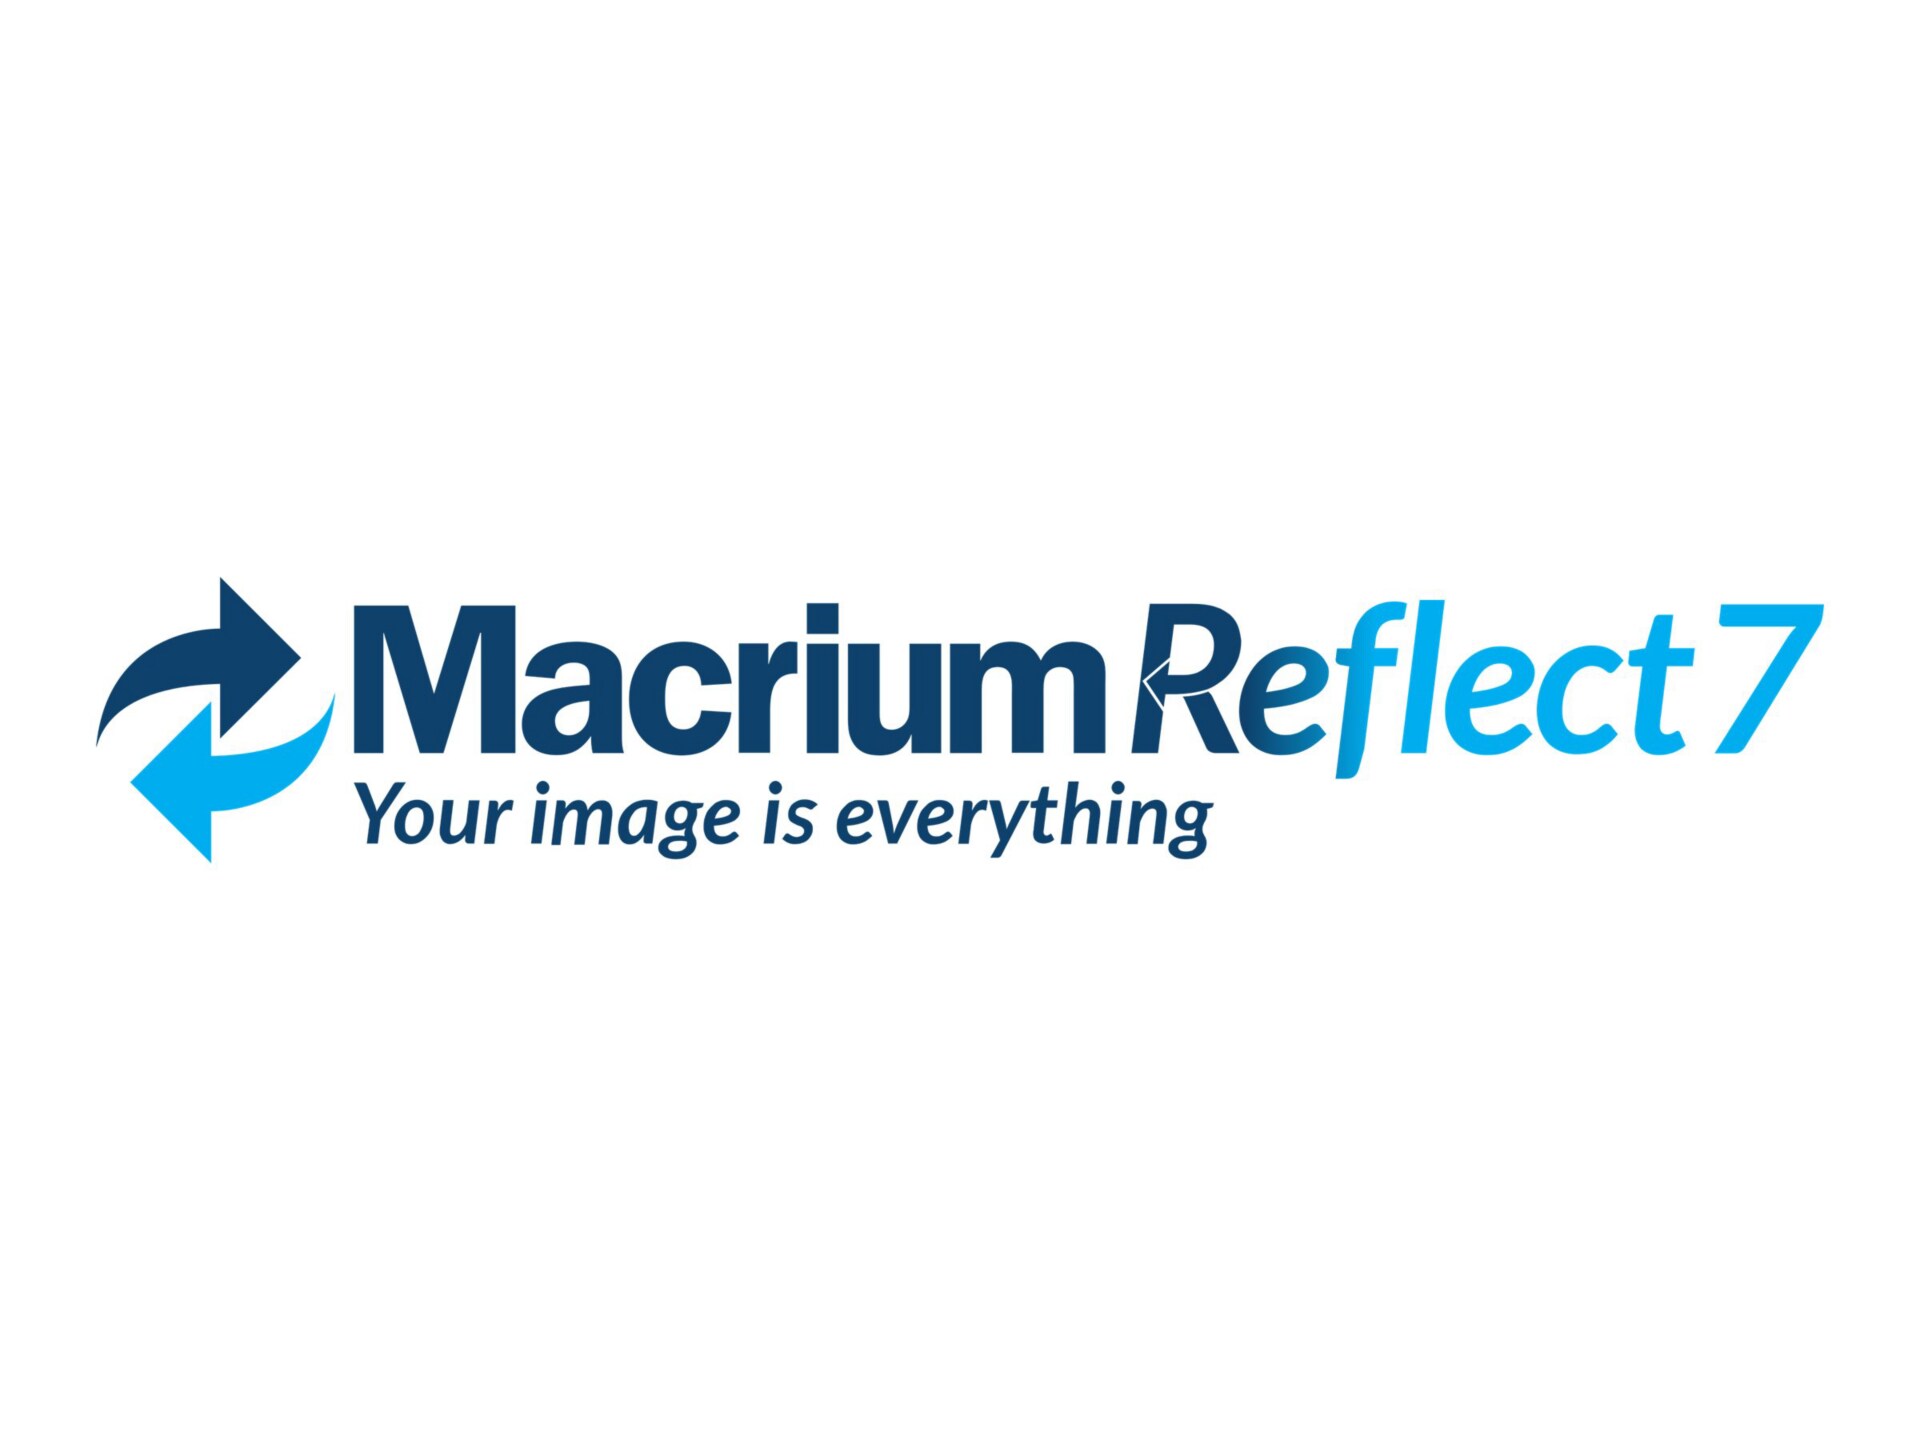 Macrium Reflect Macrium Agent License (MAL) Workstation Bundle for CMC (v. 7) - license + 1 Year Standard Support and